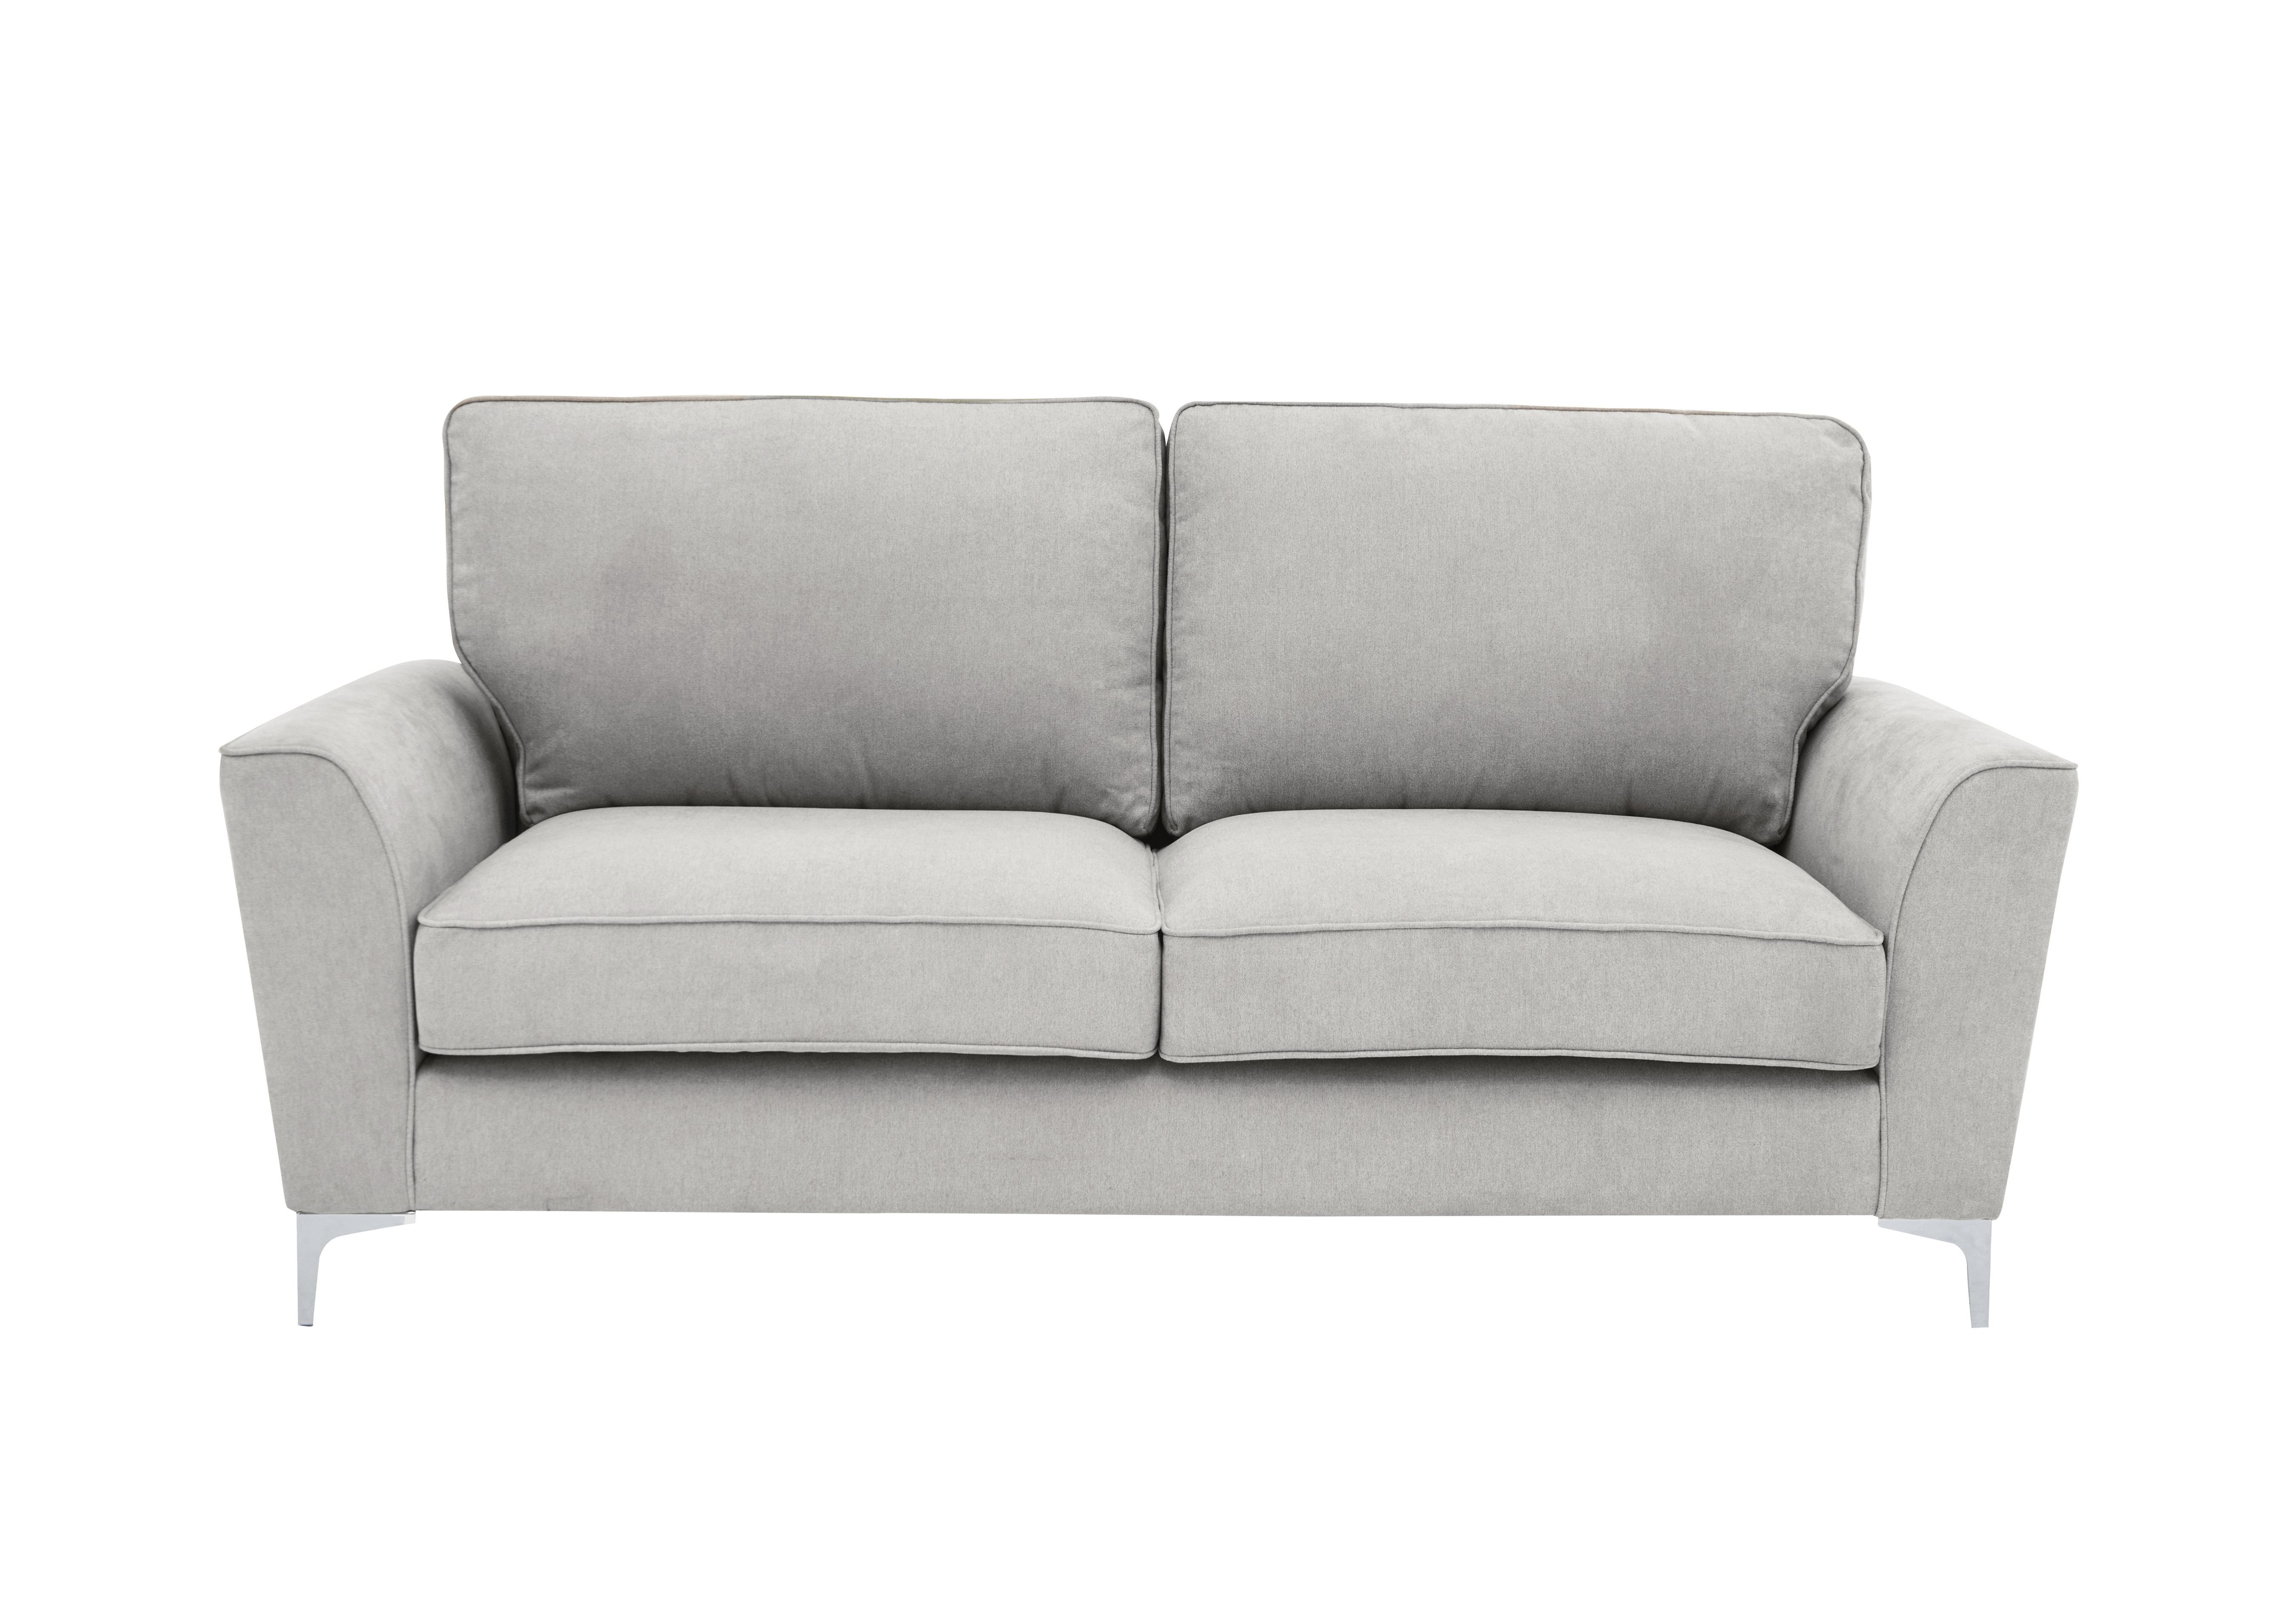 Legend 3 Seater Classic Back Fabric Sofa in Kingston Silver on Furniture Village